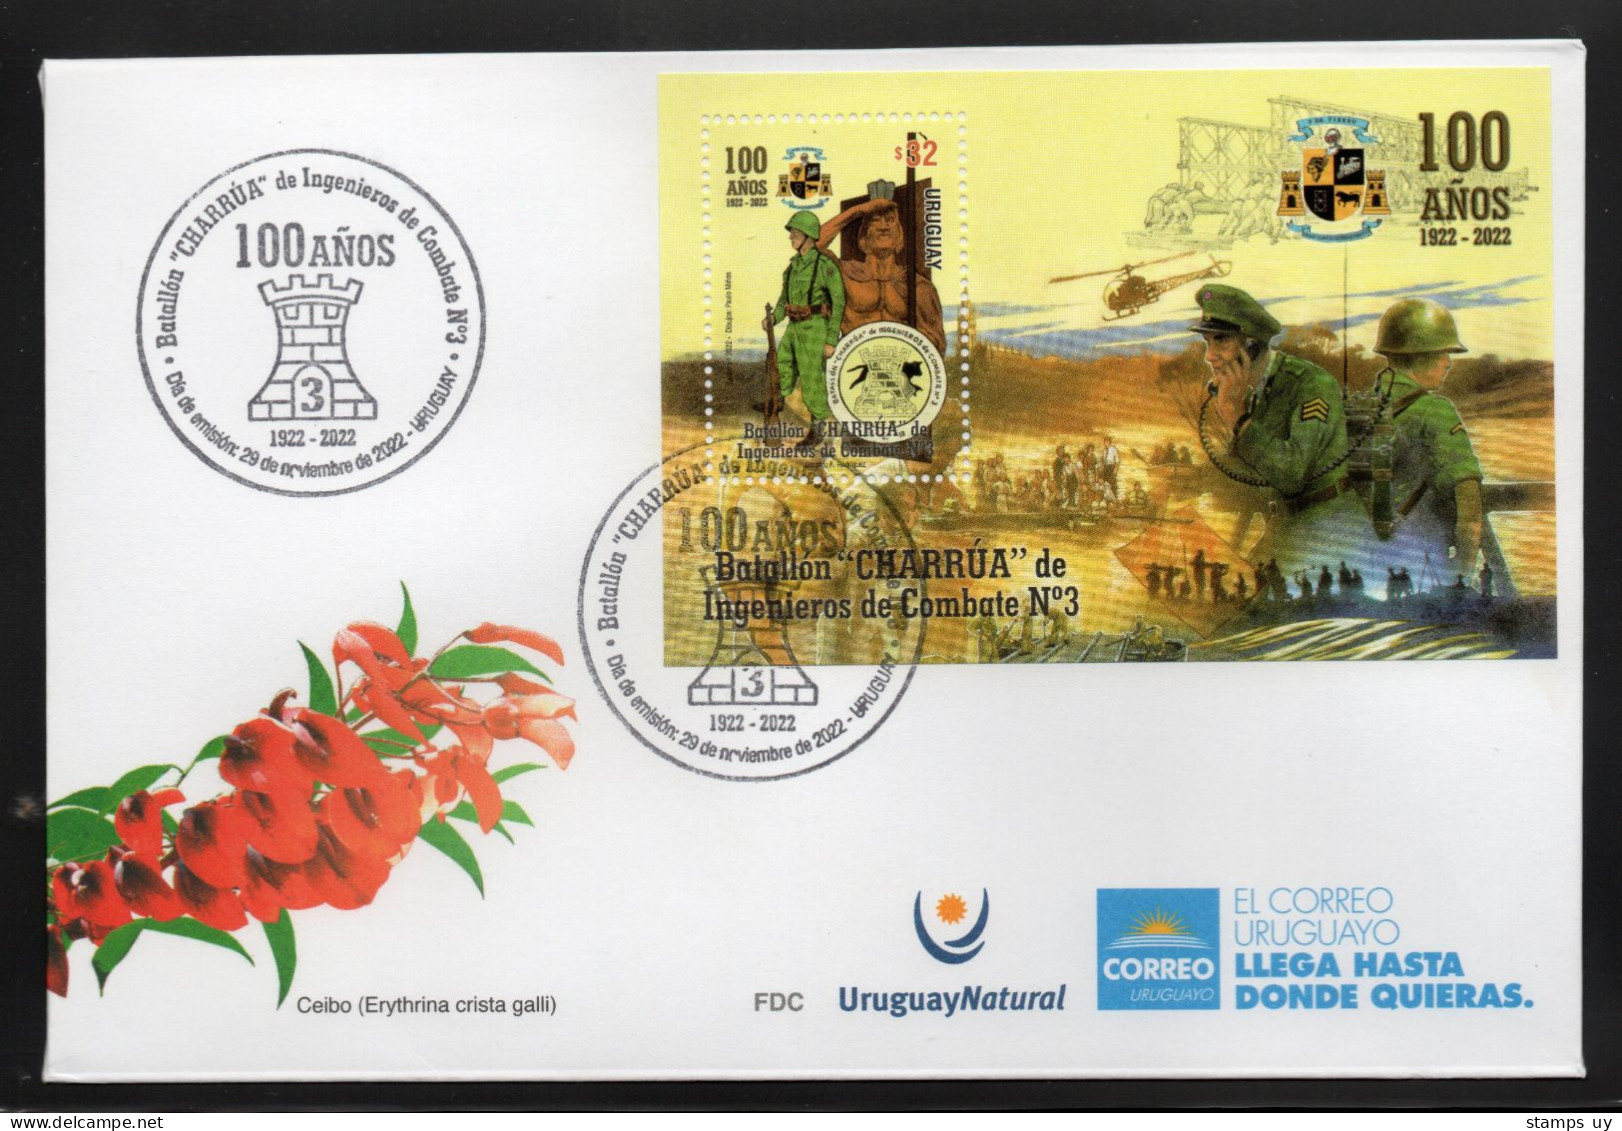 URUGUAY 2023 (Militar, Comunication, Engineer, Helicopter, Bell 47G, Train, Radio, Indigenous) - 5x FDCs START 20% OFF - Koeien